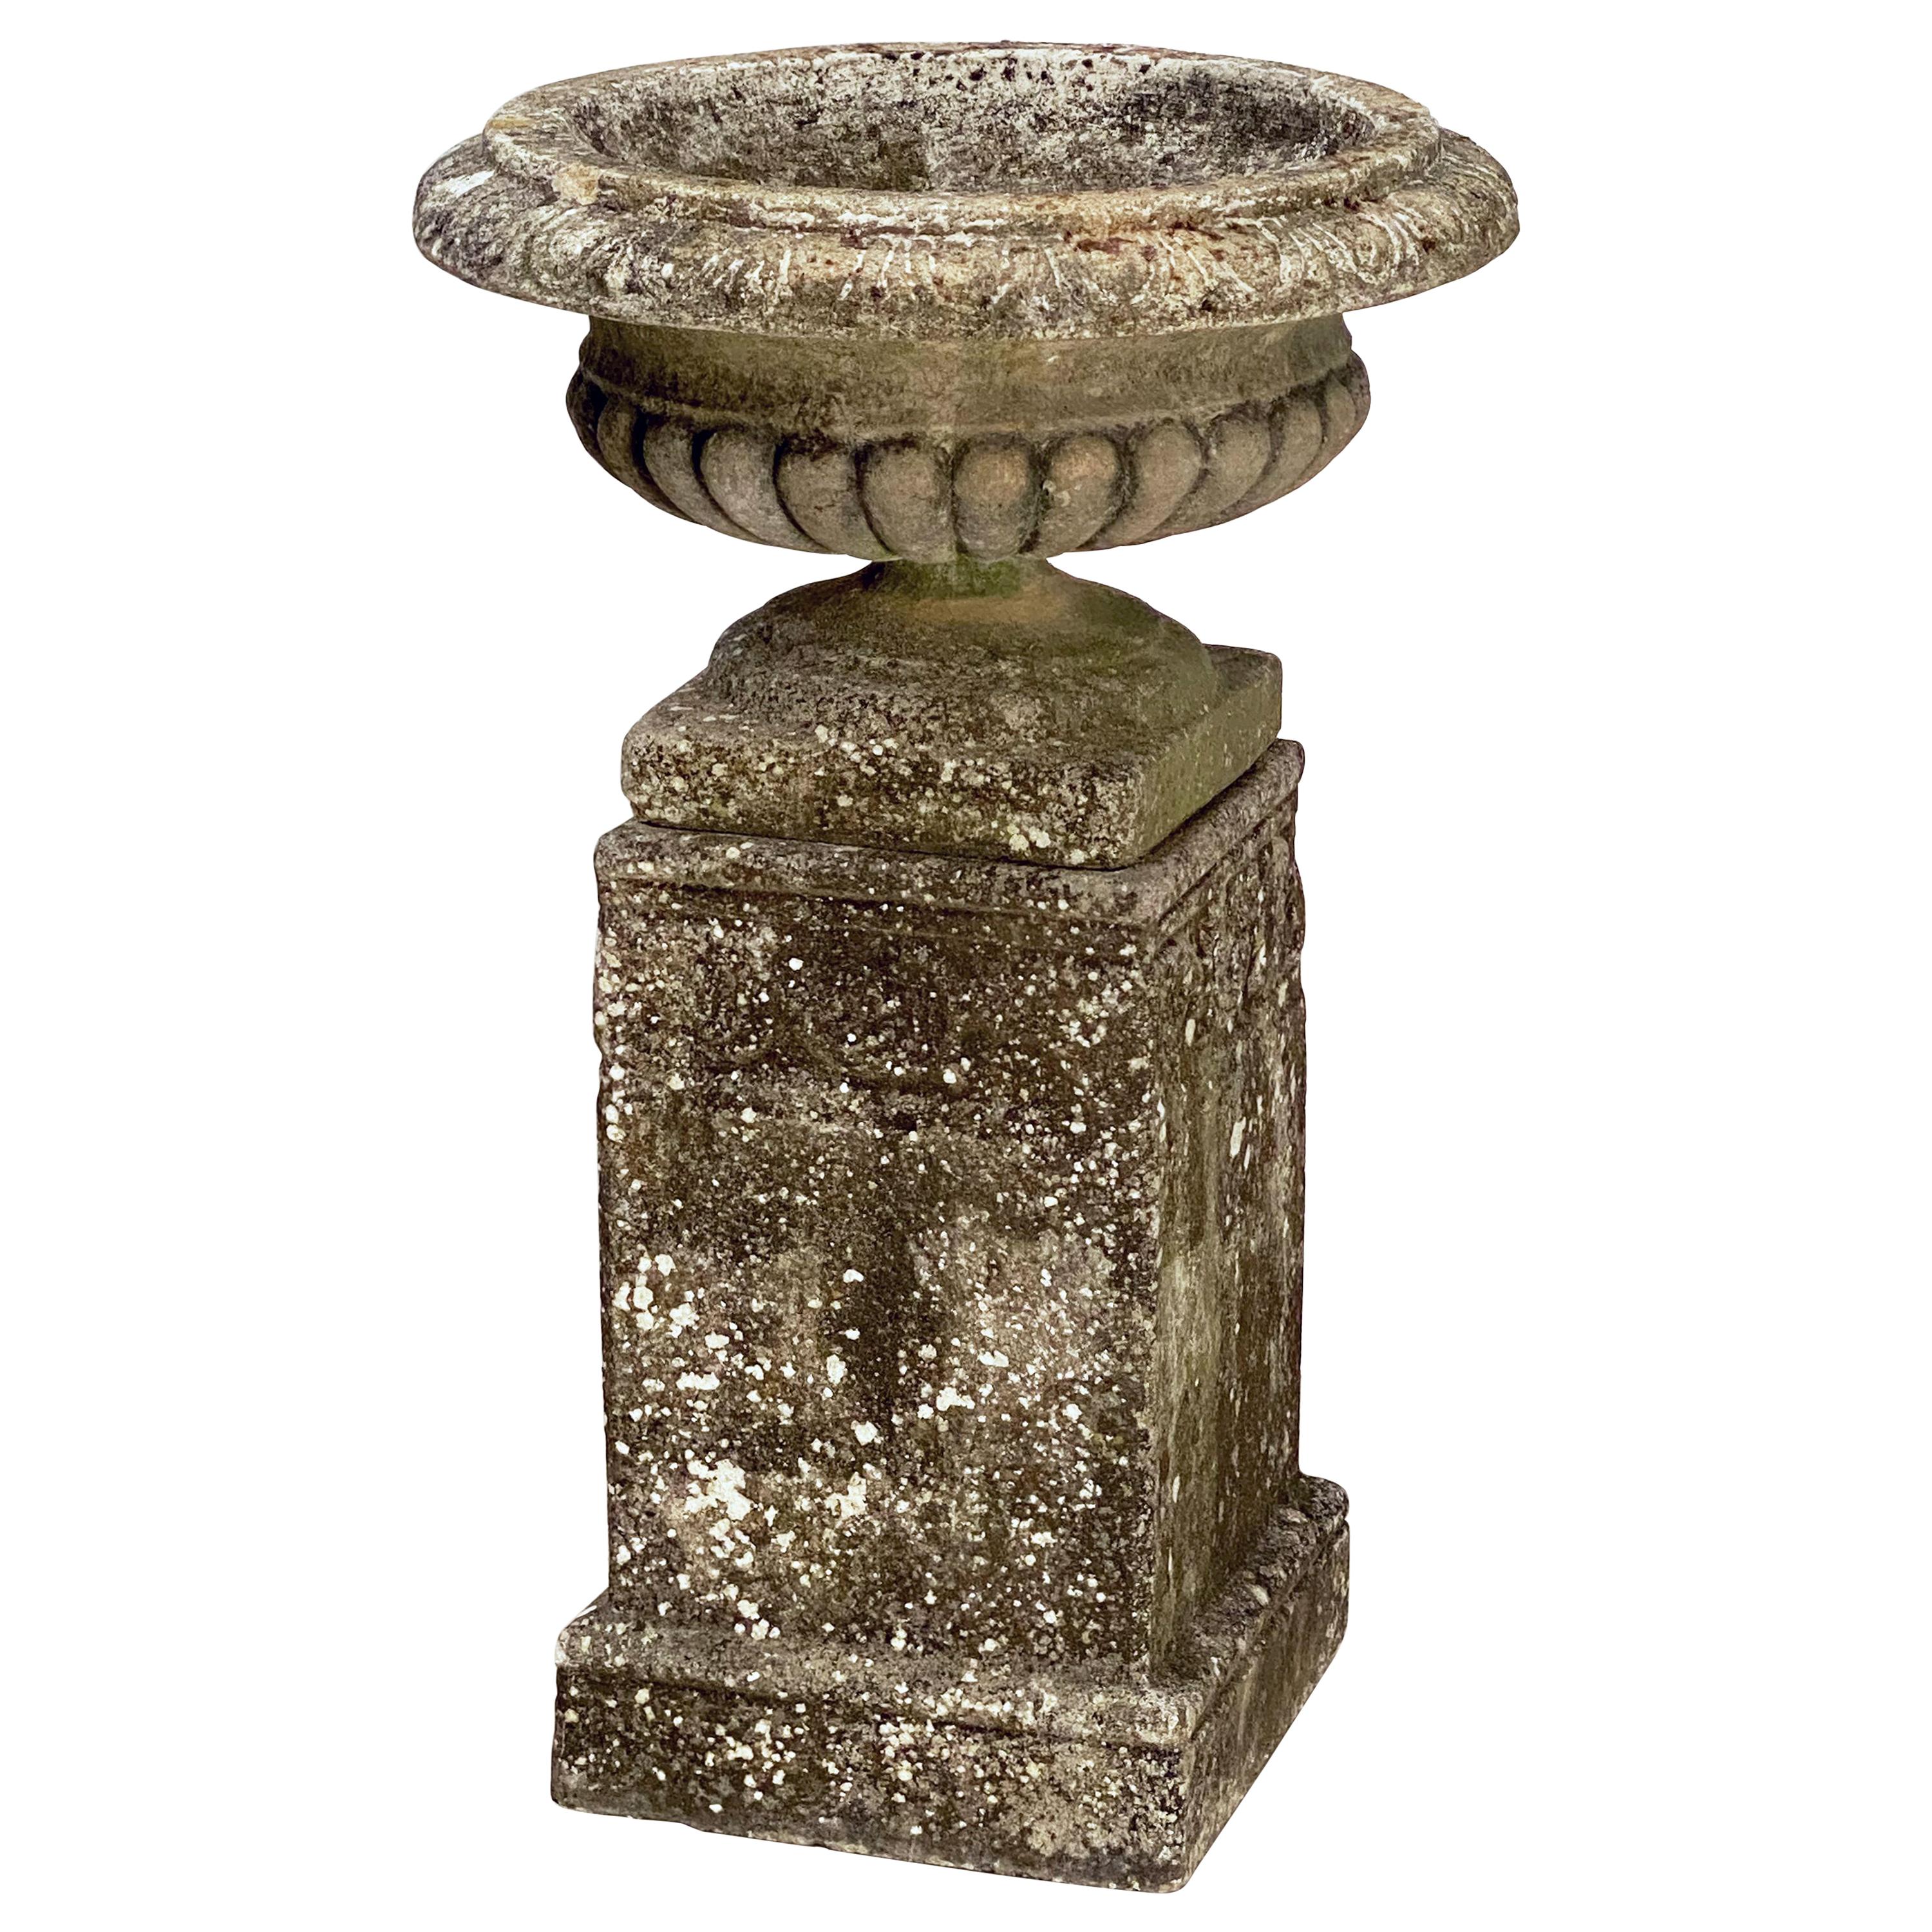 English Garden Stone Urn or Planter Pot on Plinth Base in the Classical Style